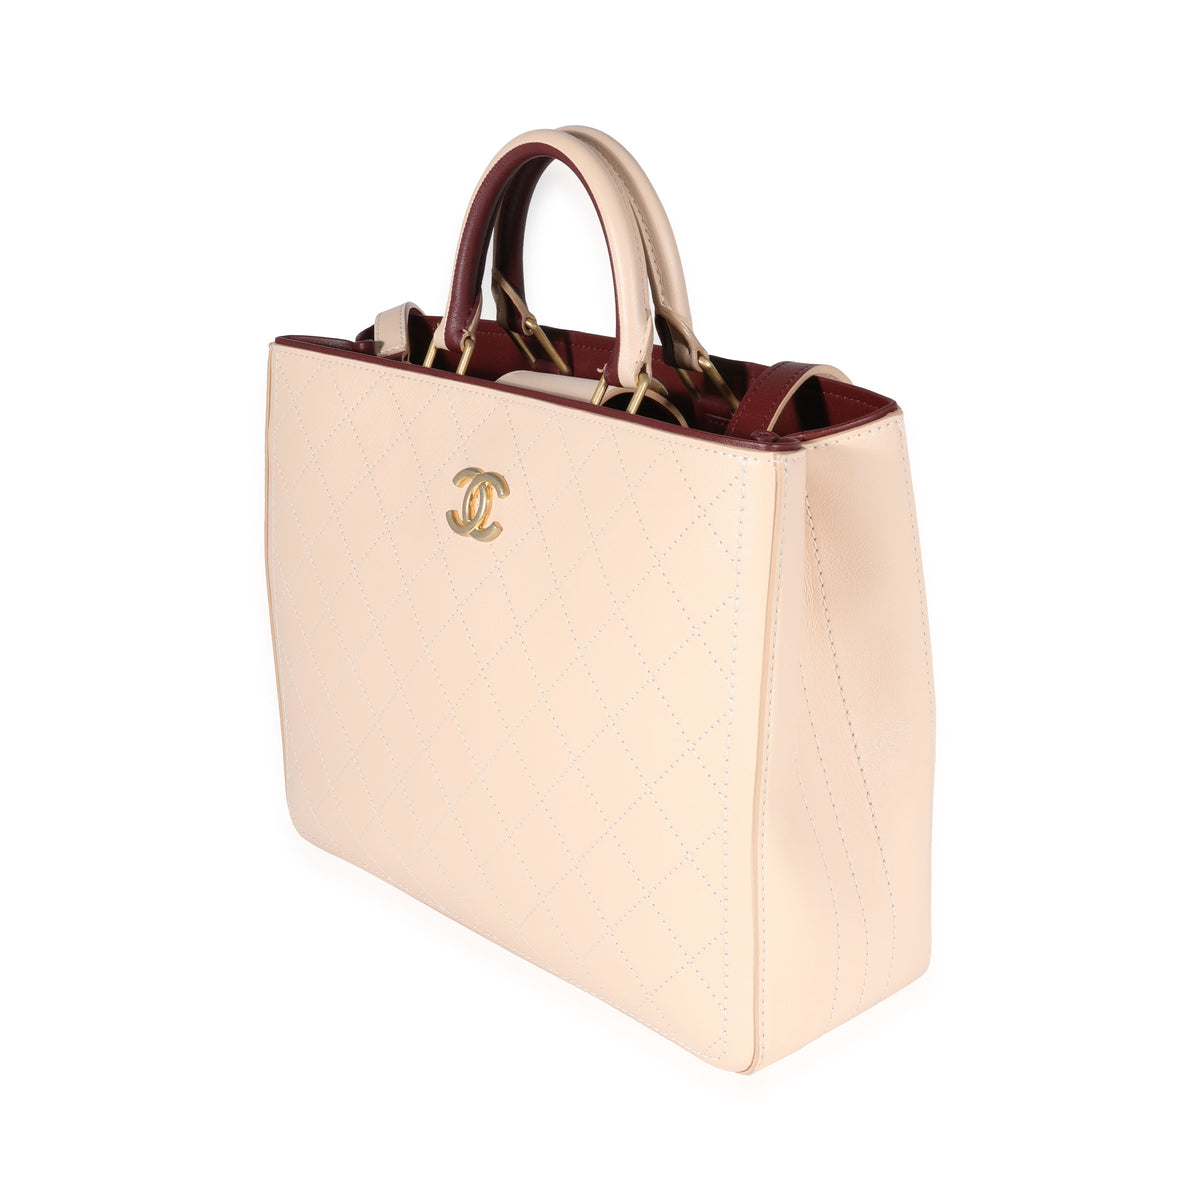 Chanel Beige & Burgundy Quilted Calfskin Shopping Tote